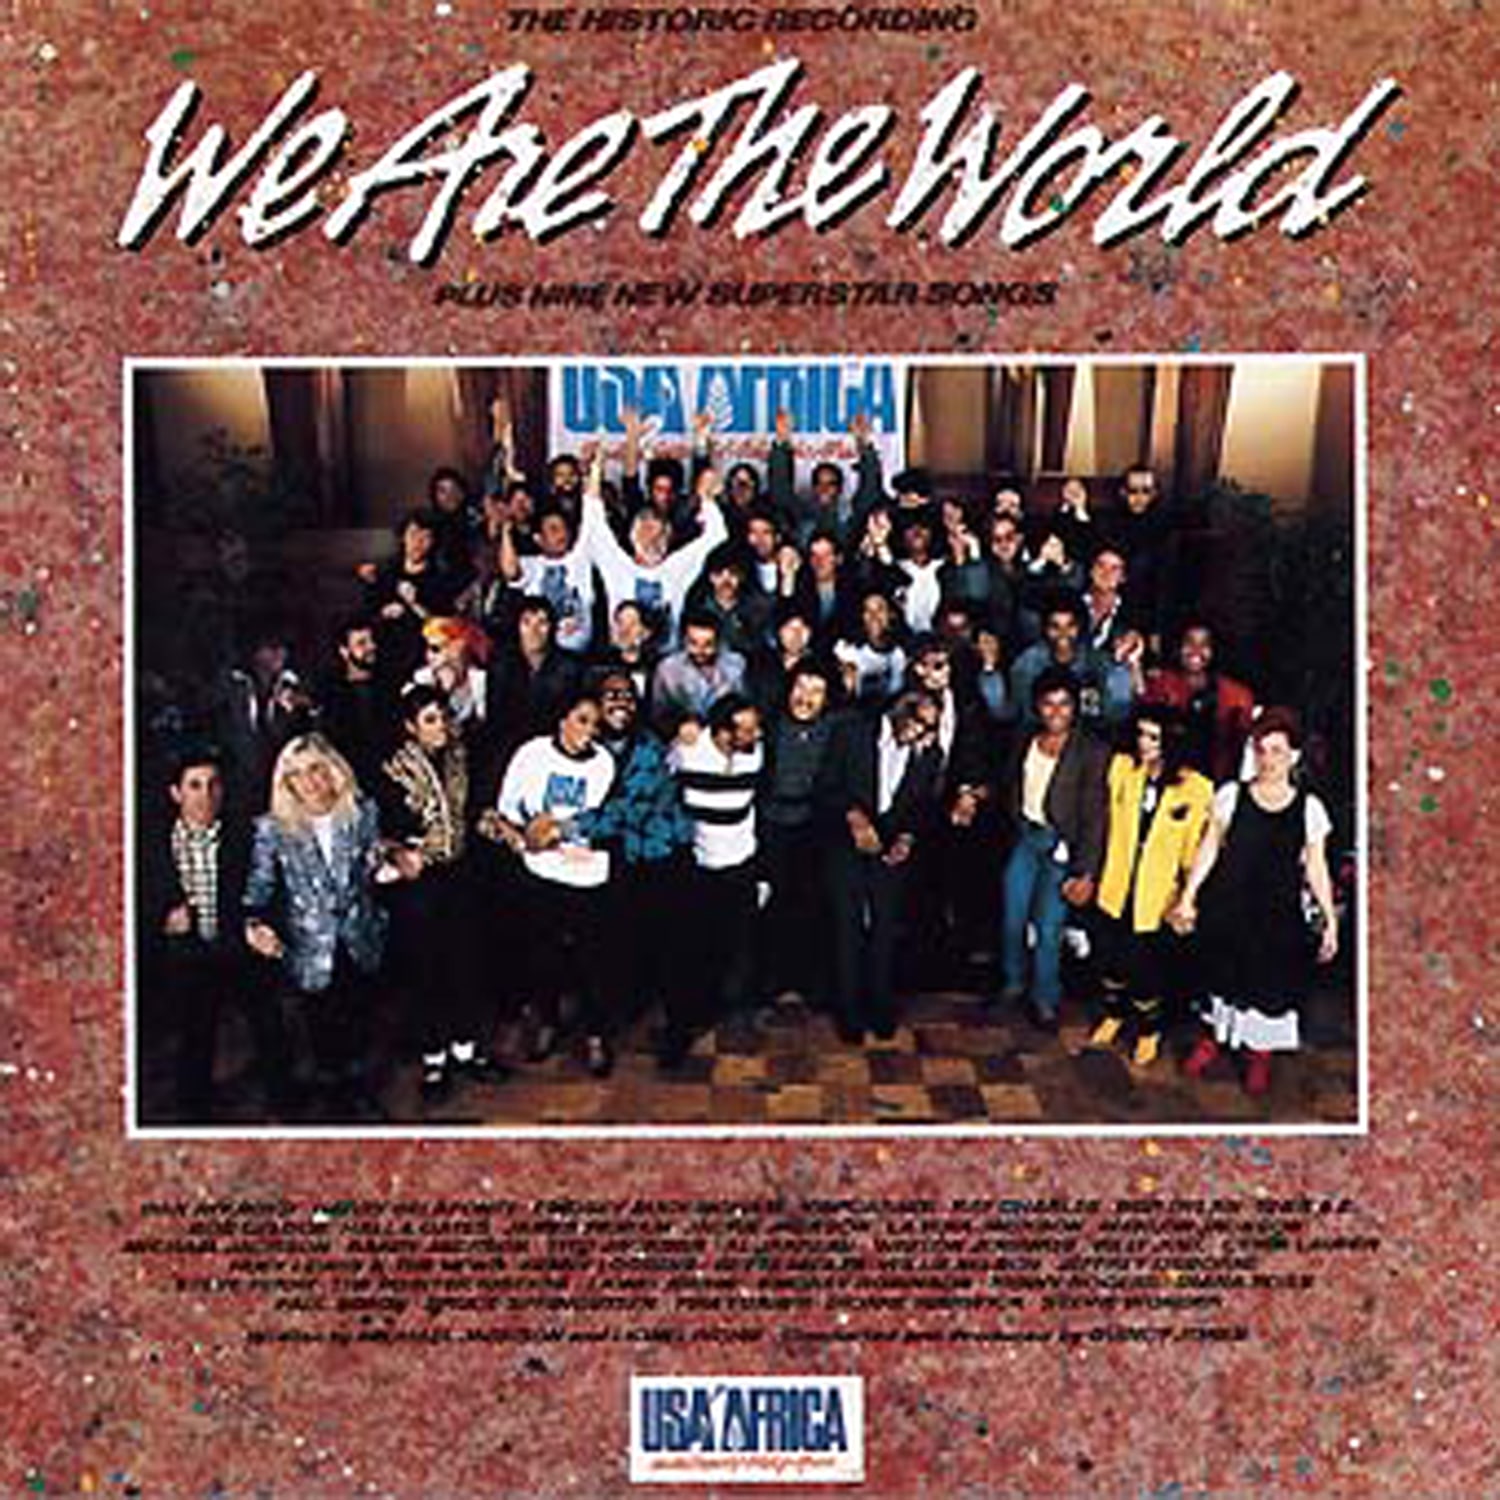 We Are the World' song celebrates 20 years